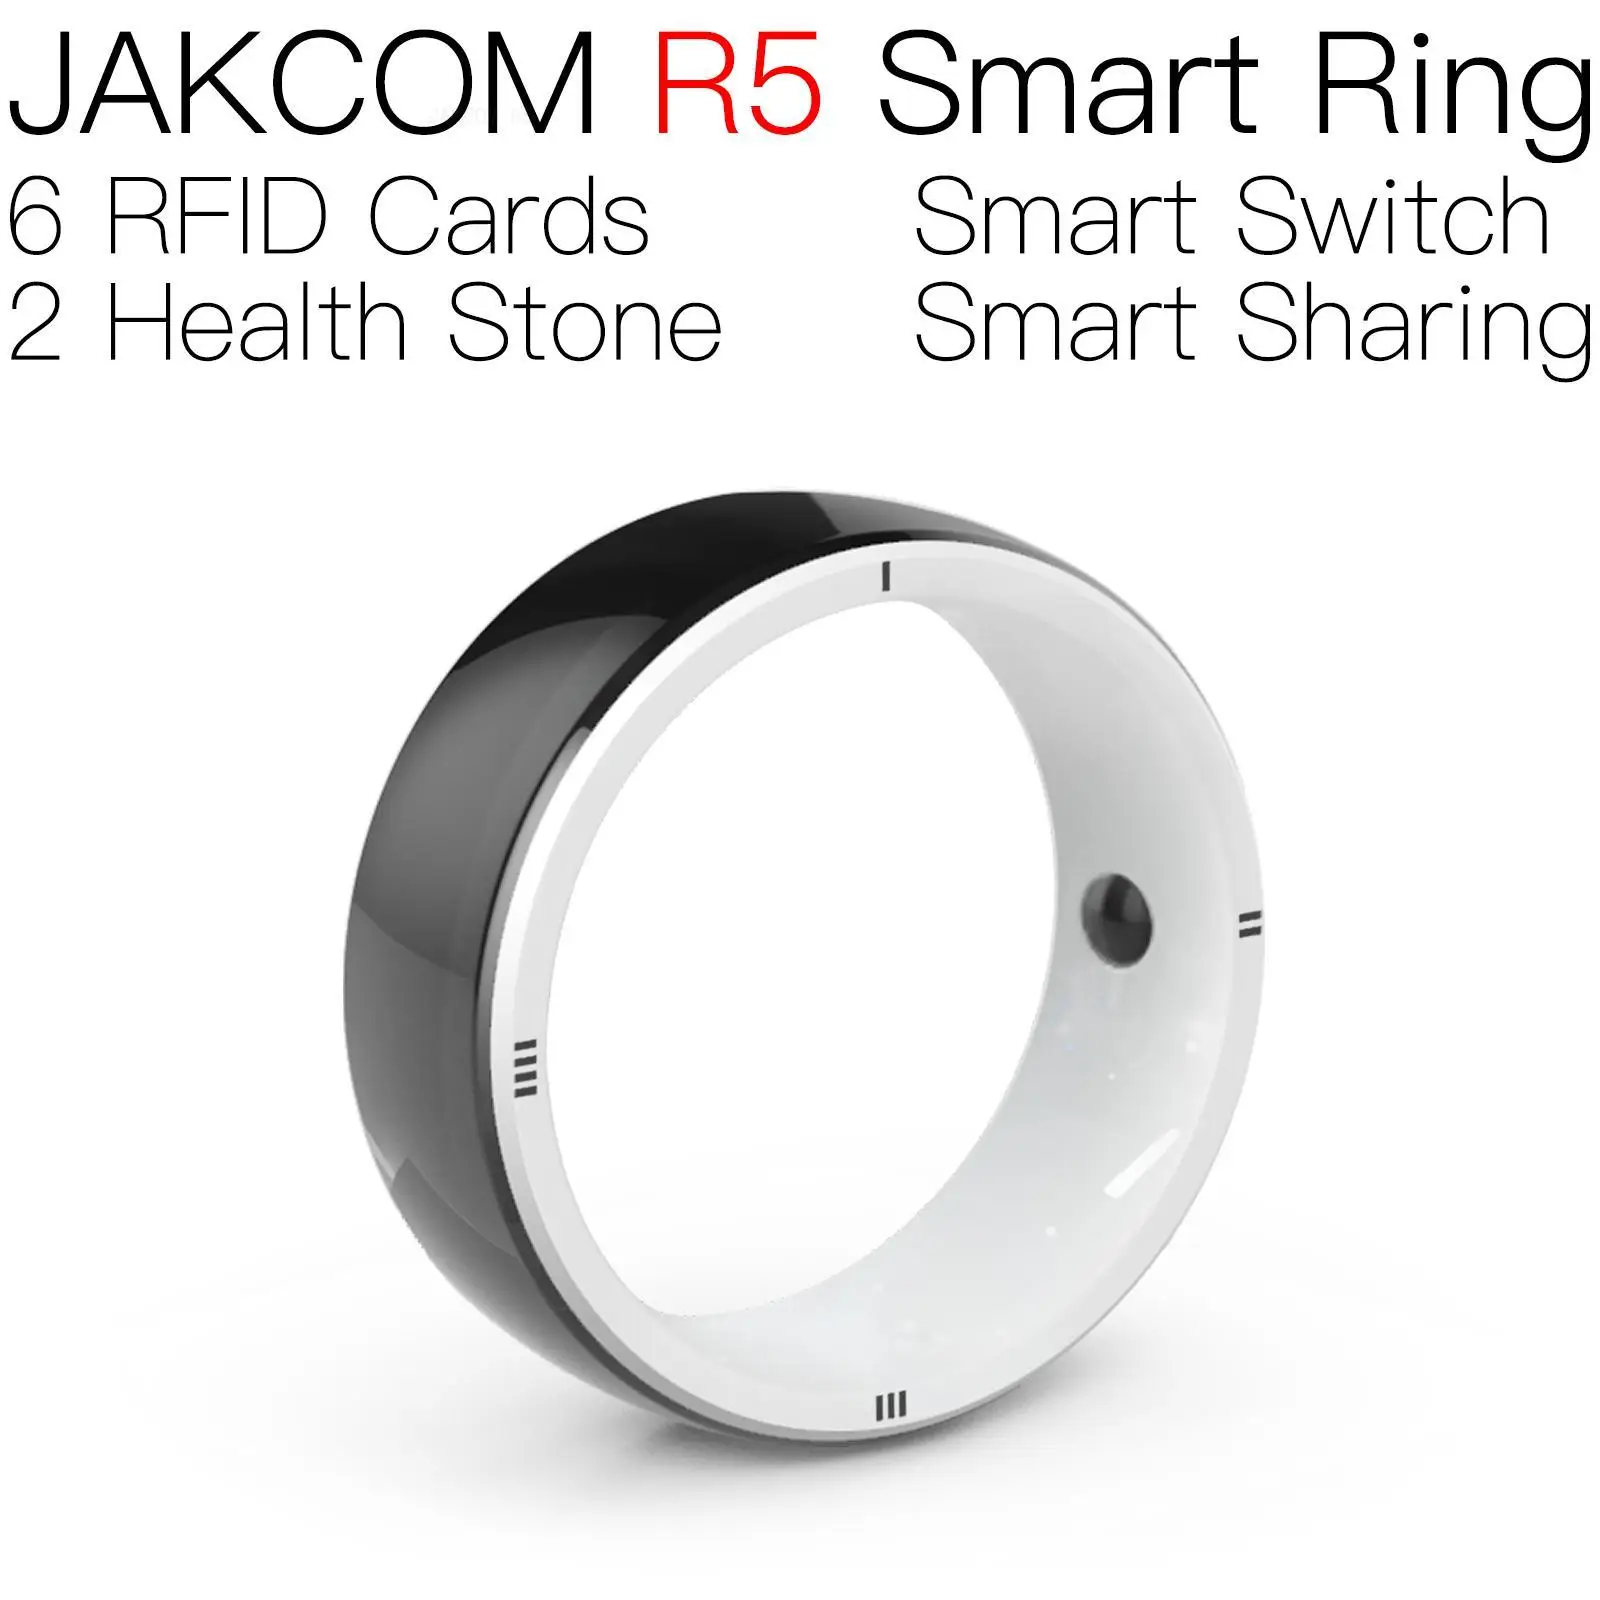 

JAKCOM R5 Smart Ring Match to metal nfc cards rfid tag 125 rewritable aminal crossing amibo blanks with chip 3 card